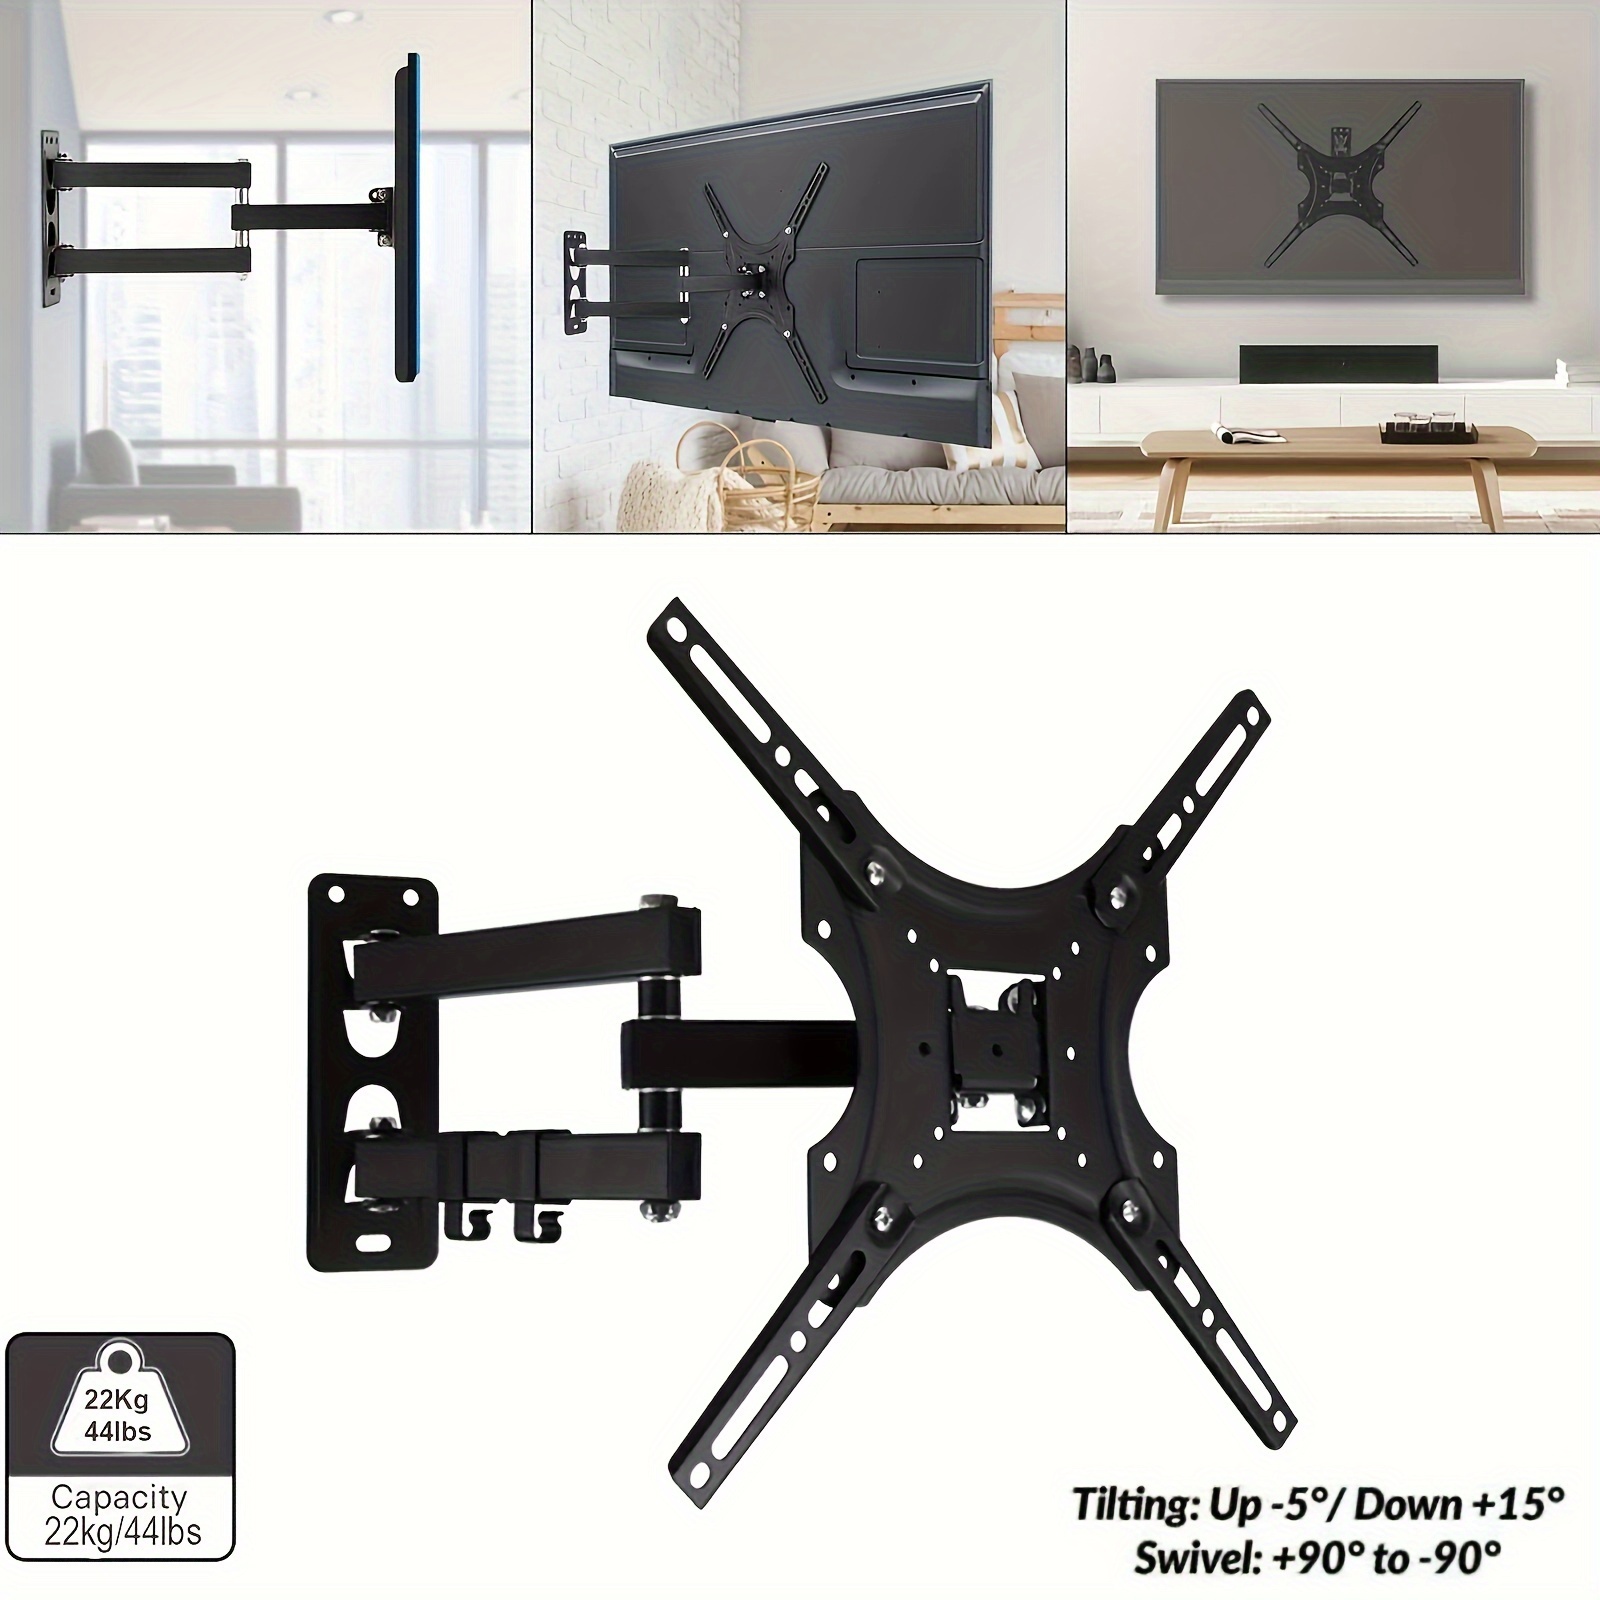 

Heavy Duty Metal Tv Wall Mount Bracket For 32-55 Inch Led Lcd Flat Curved Tvs & Monitors, Fixed Wall Installation, No Electricity Needed, Supports Up To 44lbs - Black